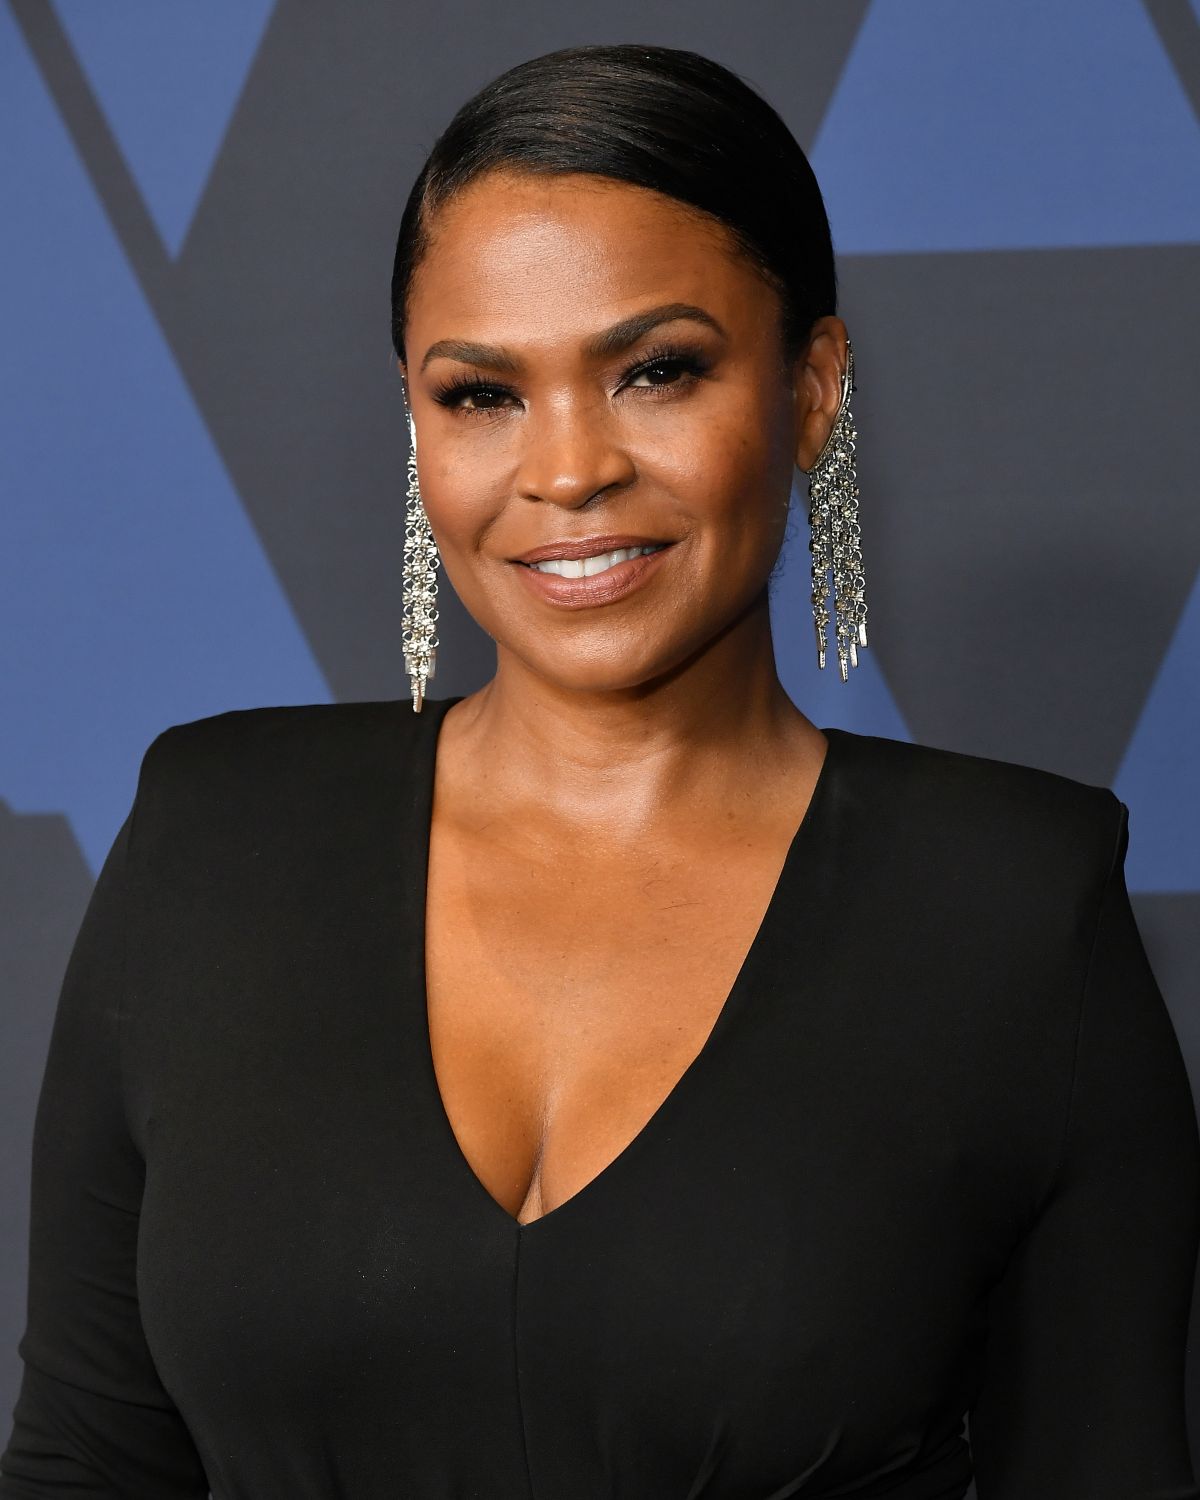 Nia Long At Ampas 11th Annual Governors Awards In Hollywood 10 27 2019 3 